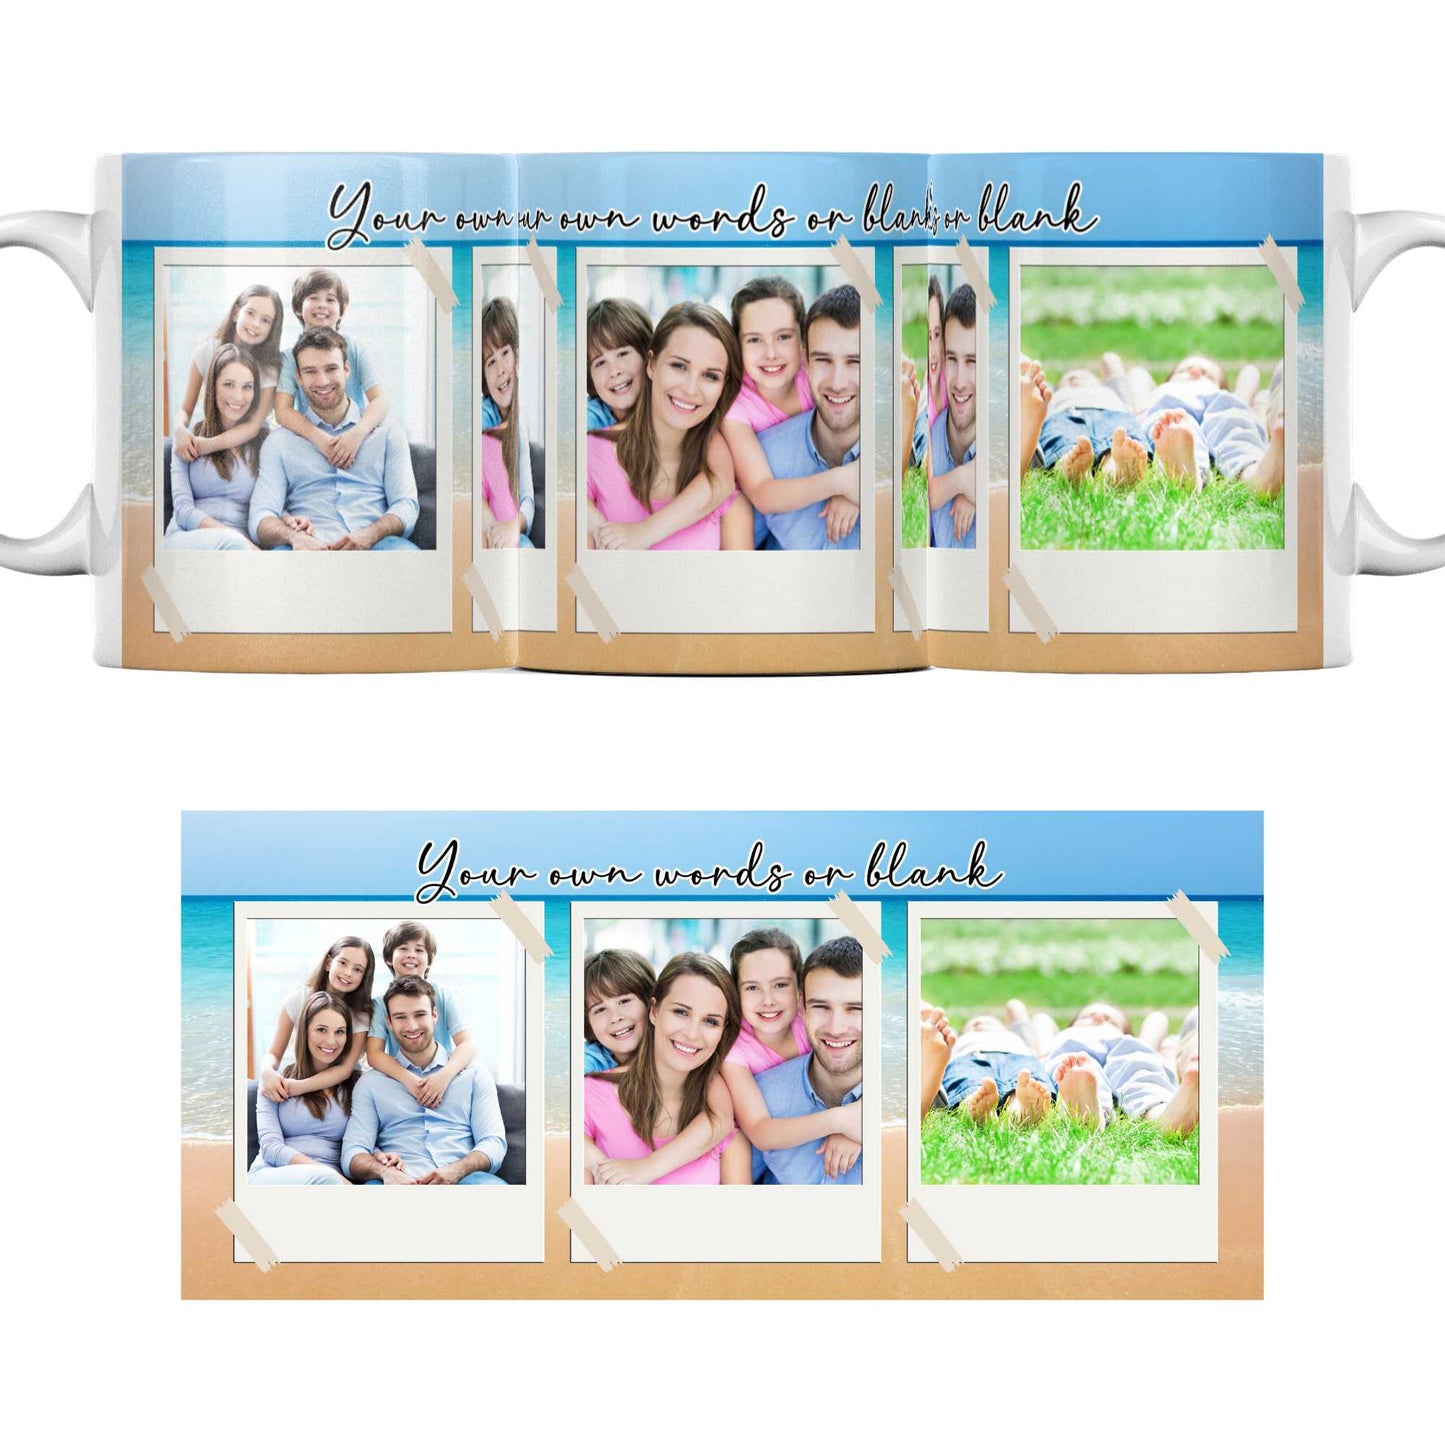 Custom beach themed personalised photo mug with any or no text